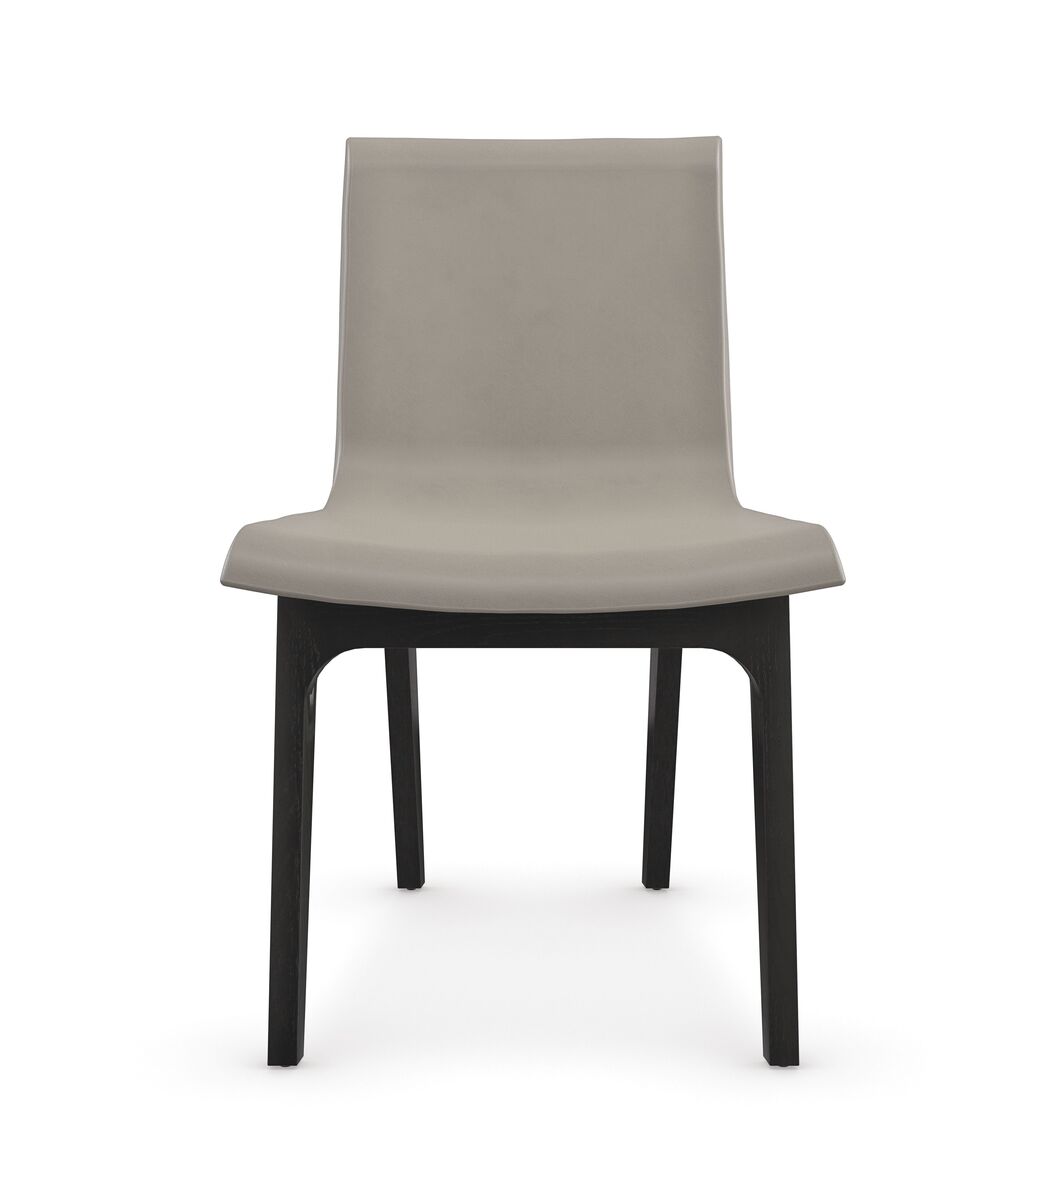 Kelly Hoppen Starr Dining Chair - AmericanHomeFurniture